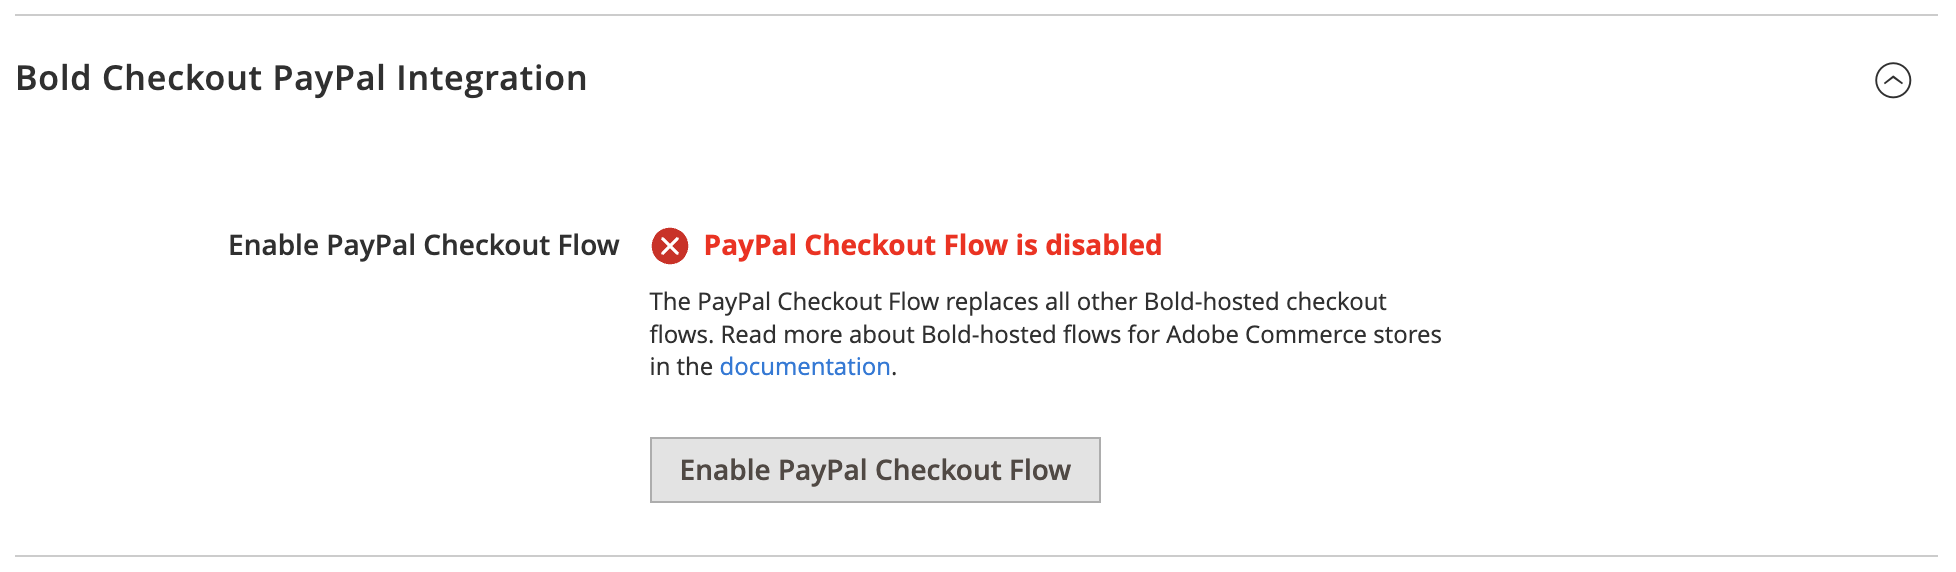 Screenshot of the expanded Bold Checkout PayPal Integration section in the Adobe Commerce Admin. The flow is disabled.